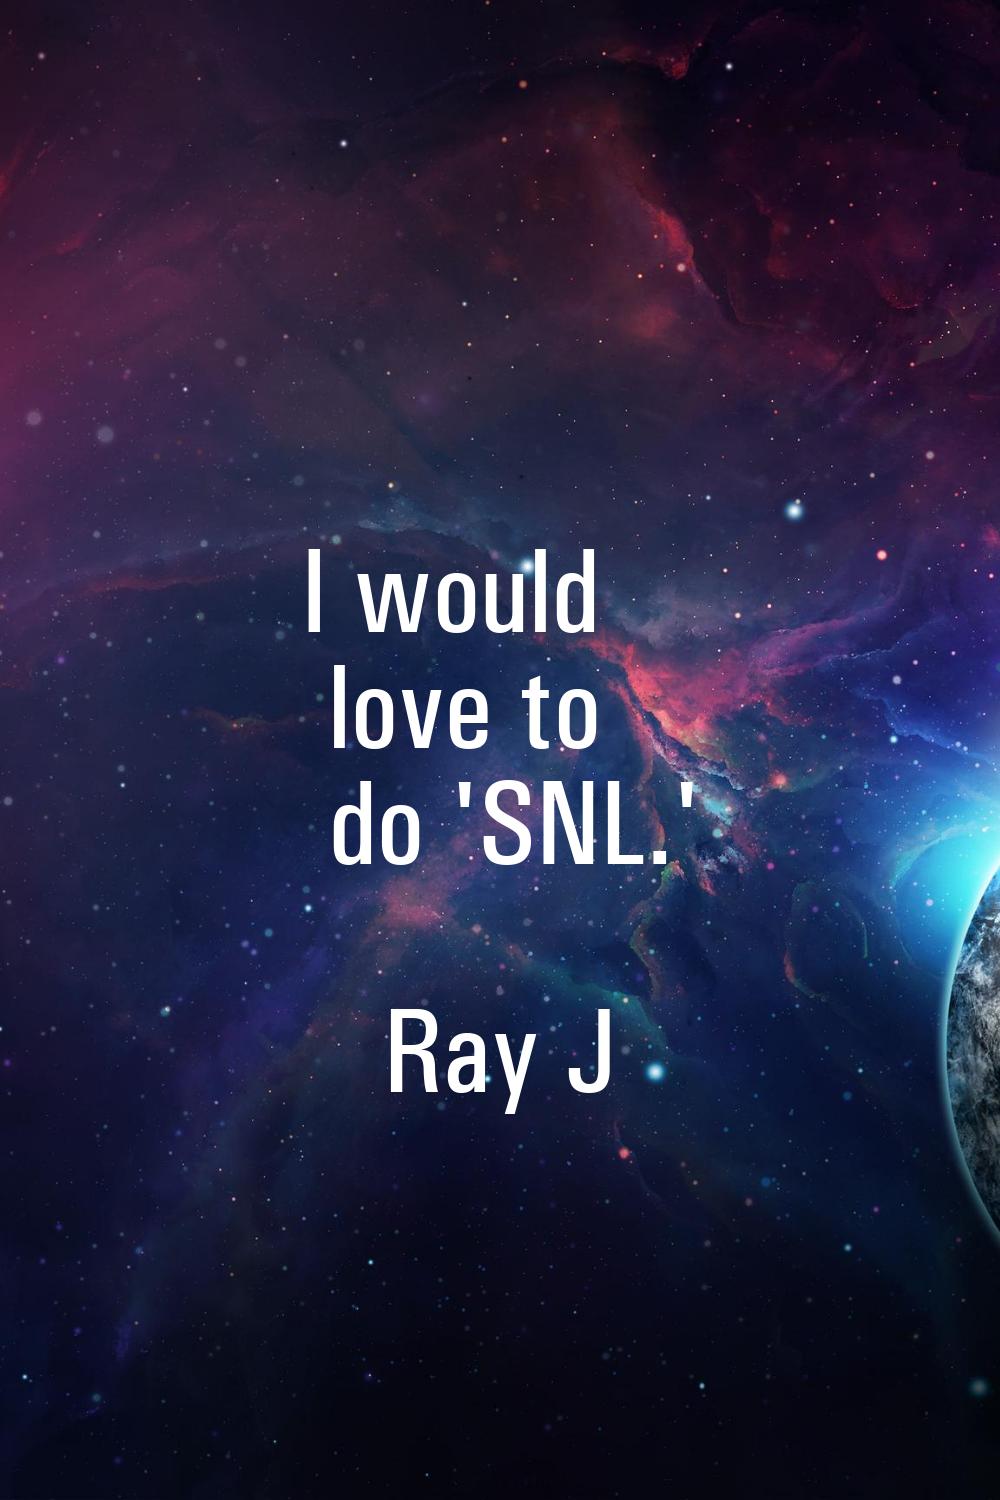 I would love to do 'SNL.'